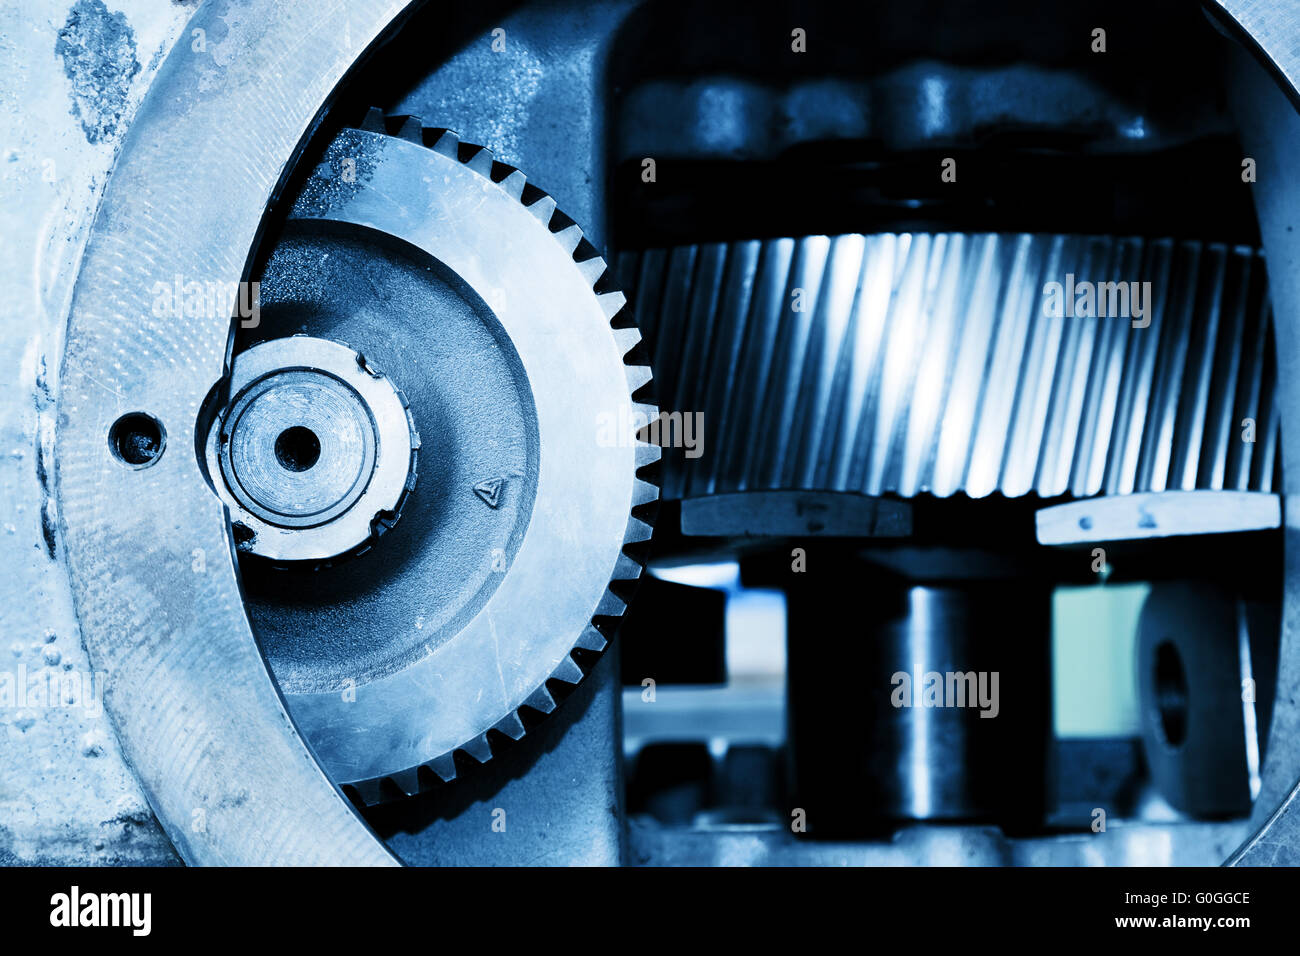 Gear machine industrial elements close-up. Industry Stock Photo